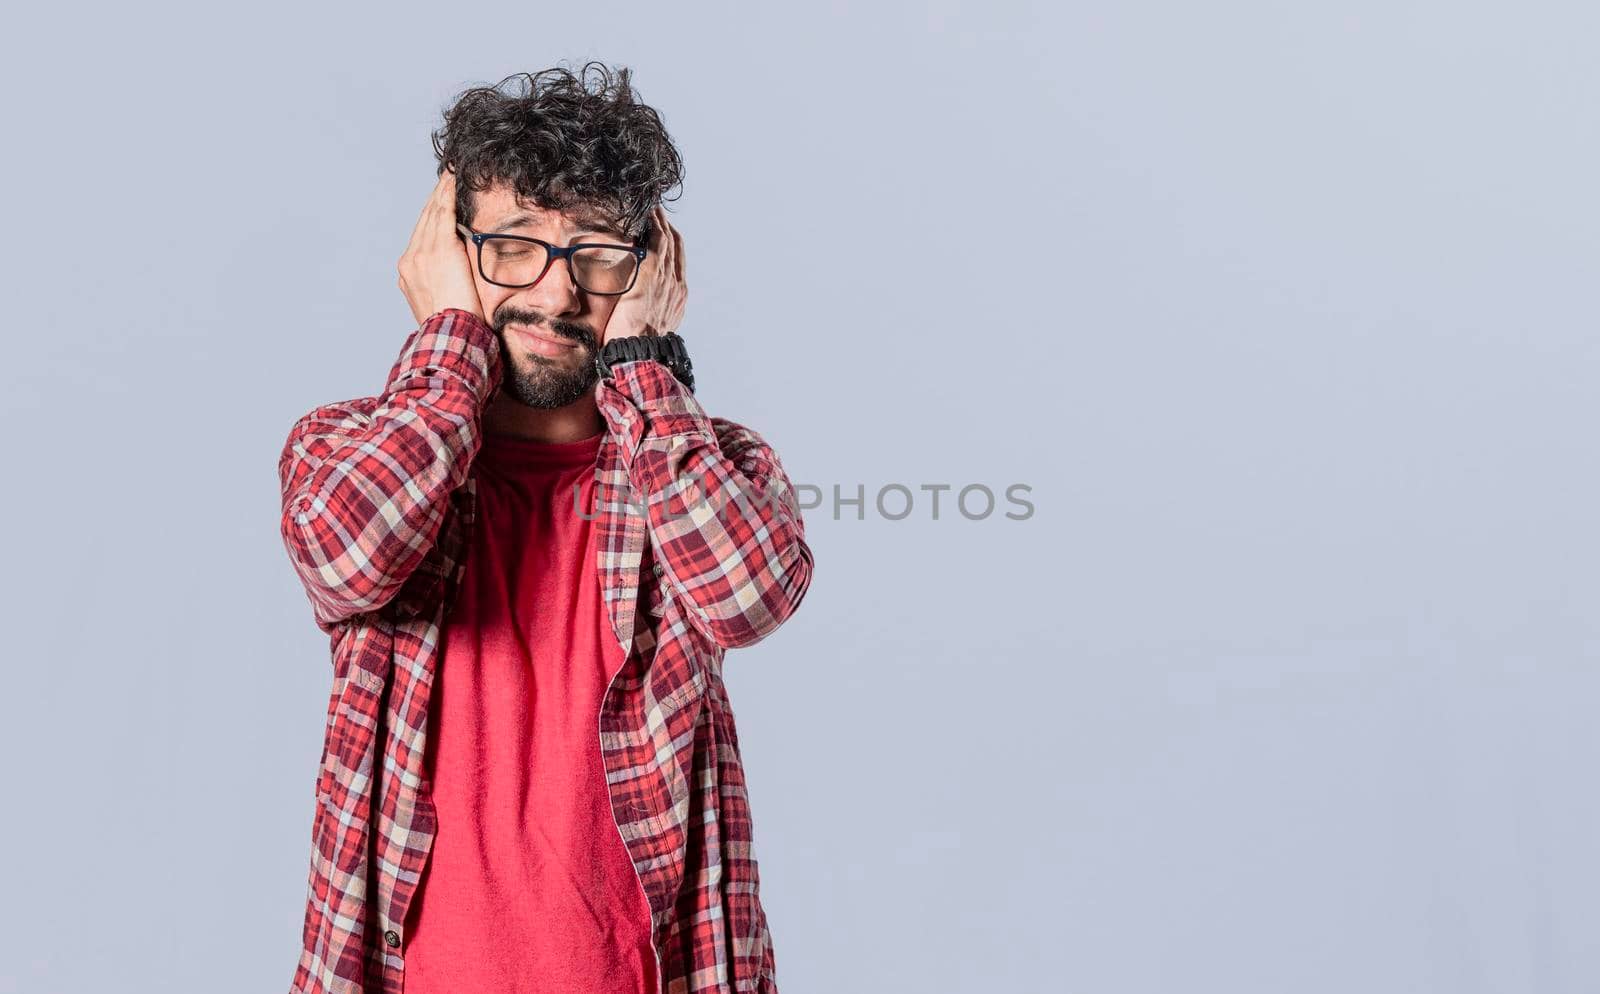 Man covering his ears on isolated background, a guy covering his ears, avoiding hearing, deaf ears concept, by isaiphoto